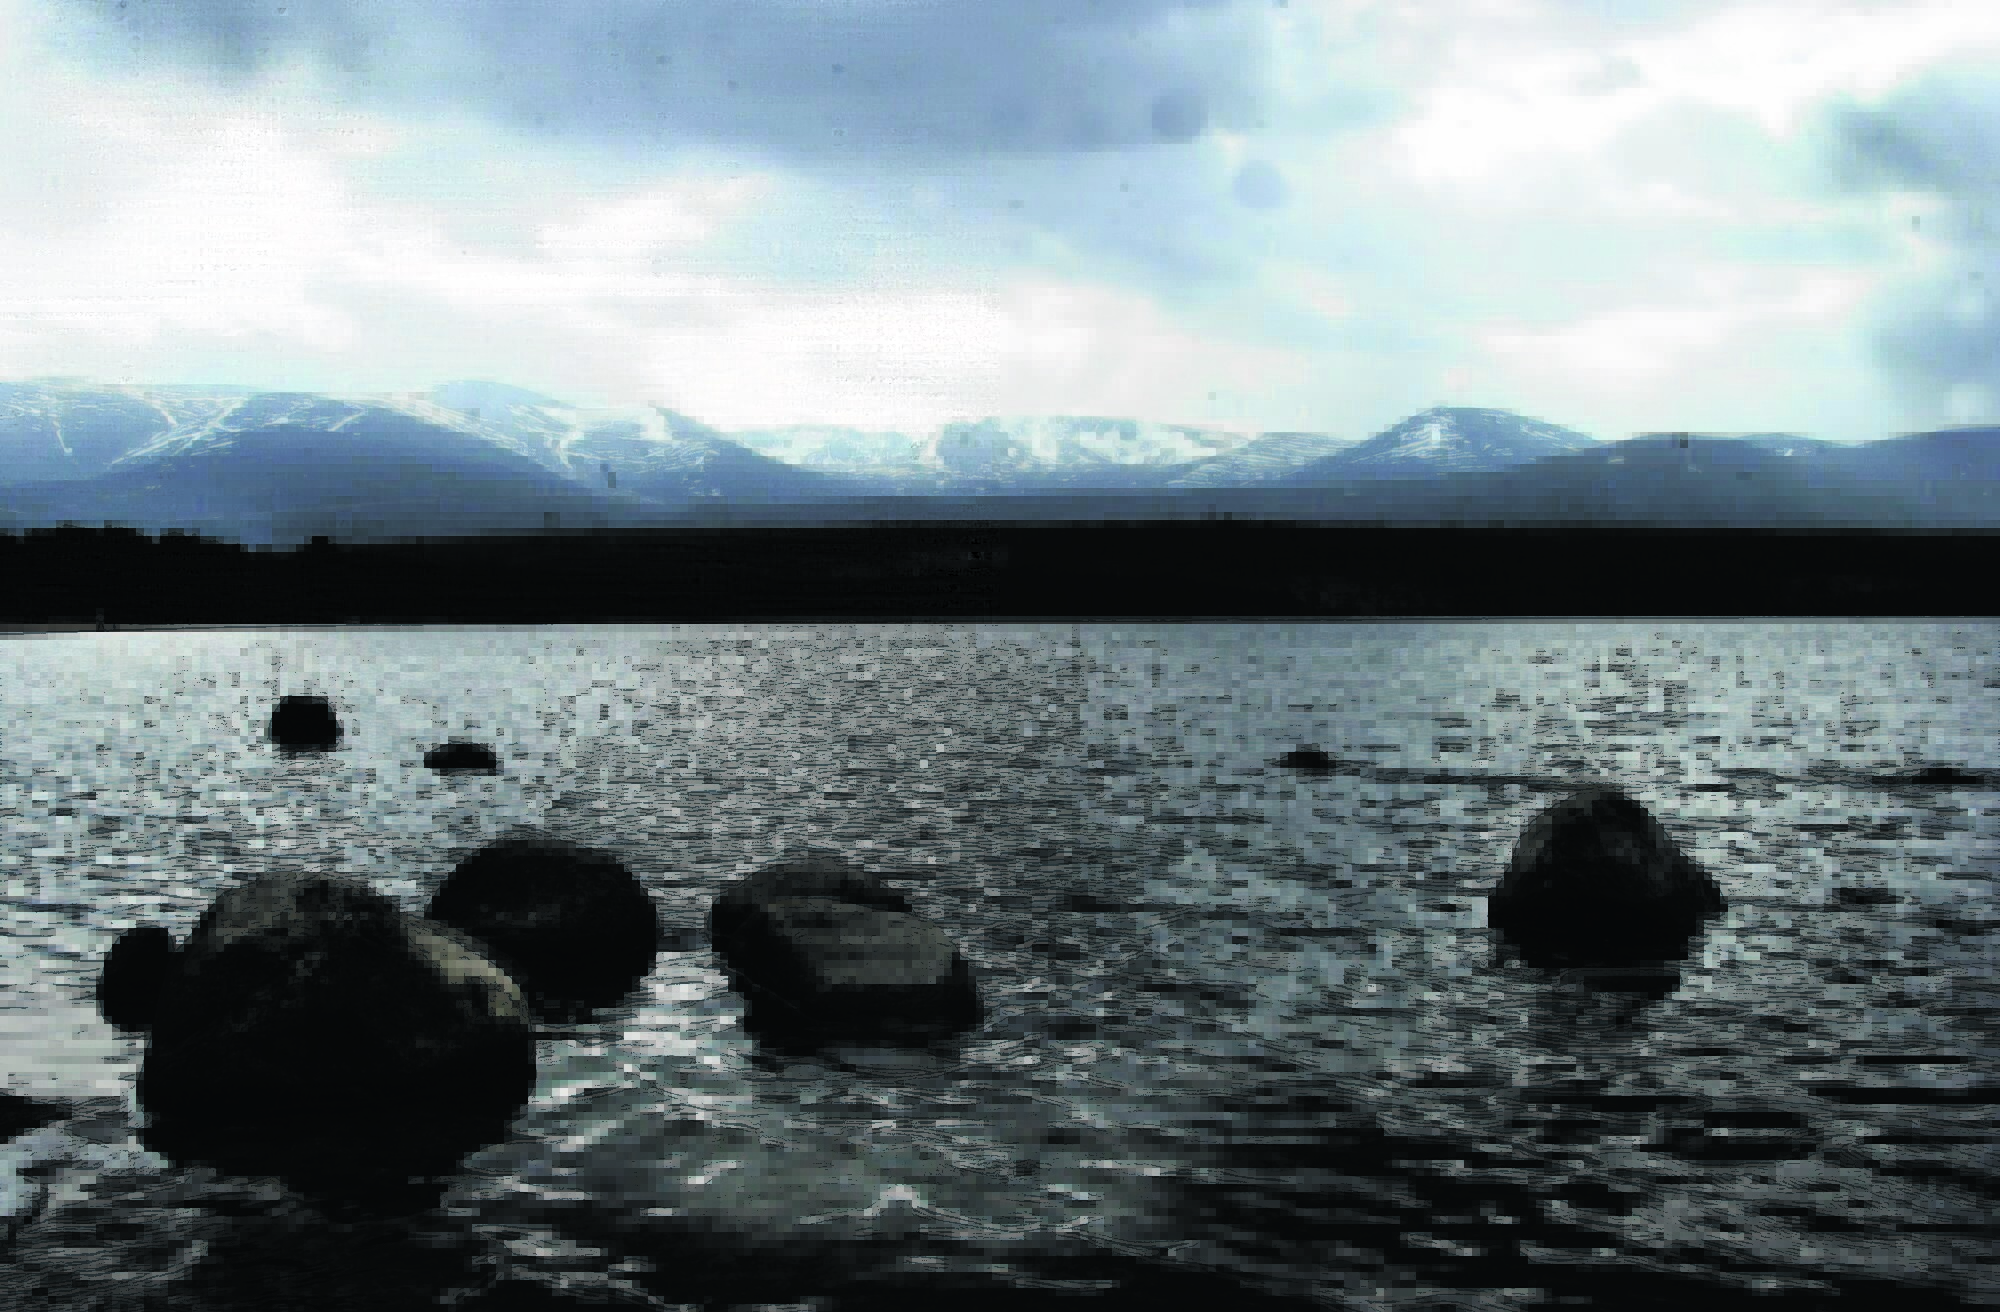 Loch Morlich is one of the spots that will be documented by the project